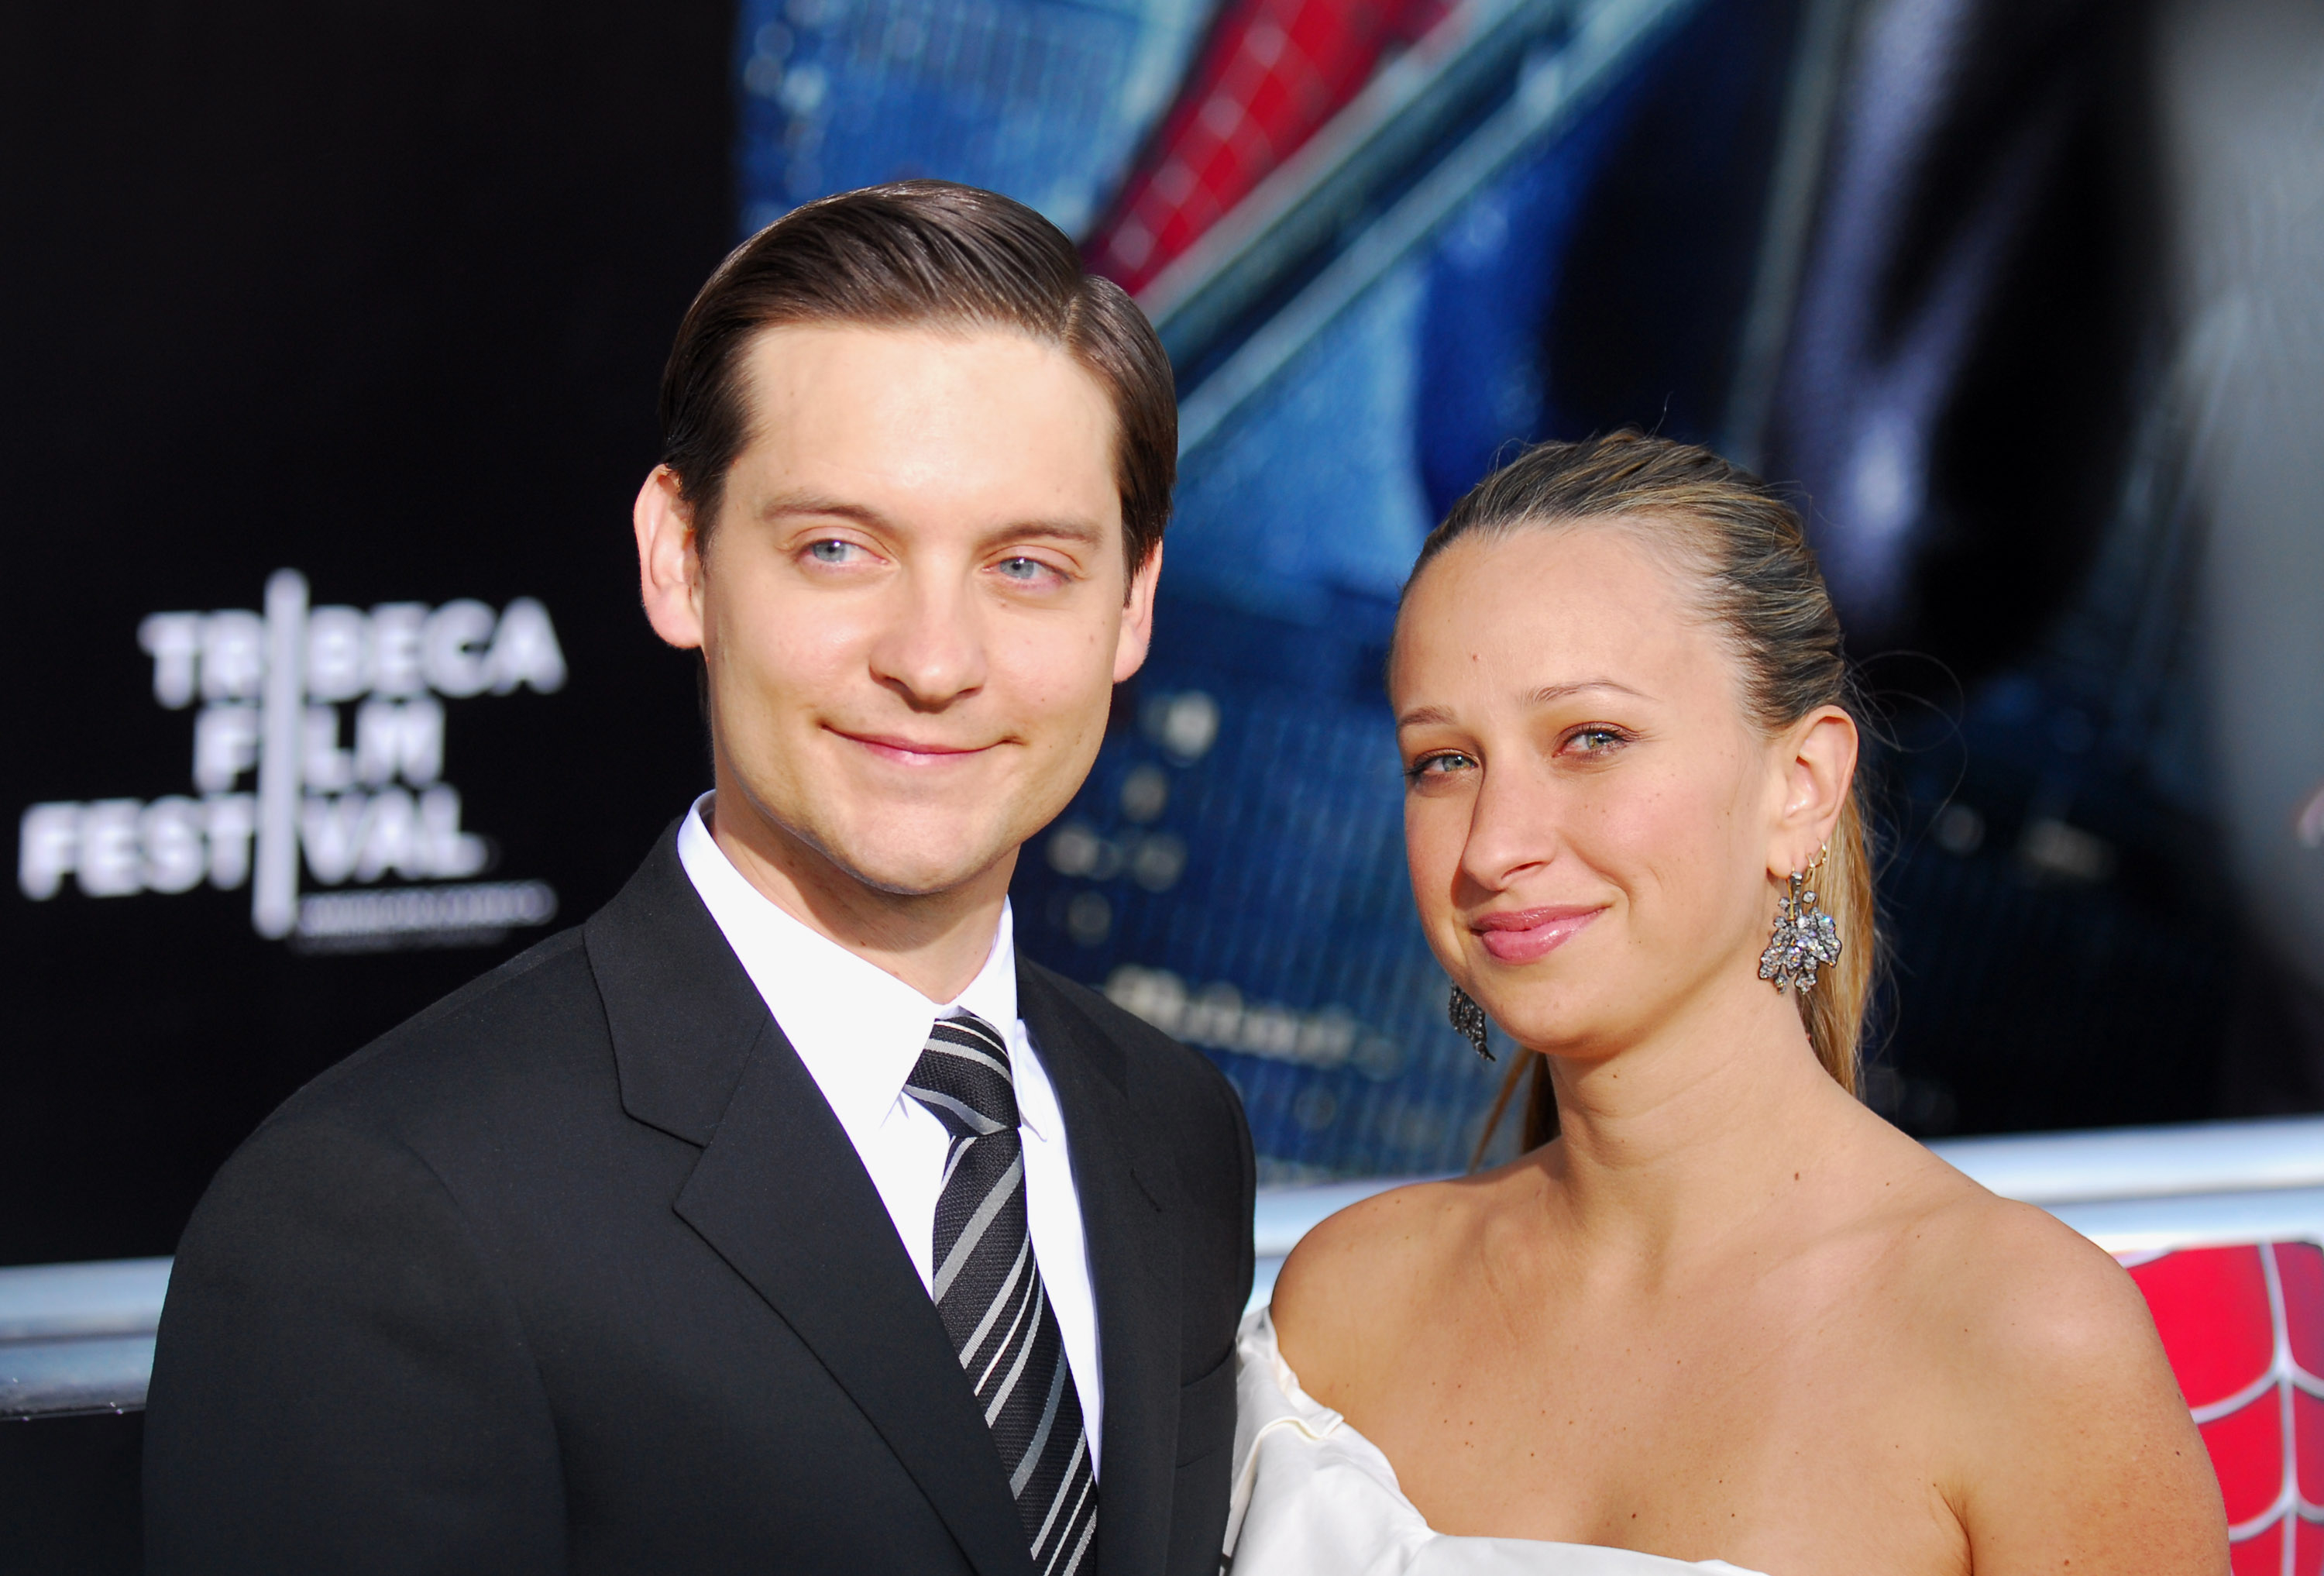 Tobey Maguire and Jennifer Meyer pose together at the Tribeca Film Festival in formal attire. Maguire wears a suit and tie, while Meyer wears a strapless dress